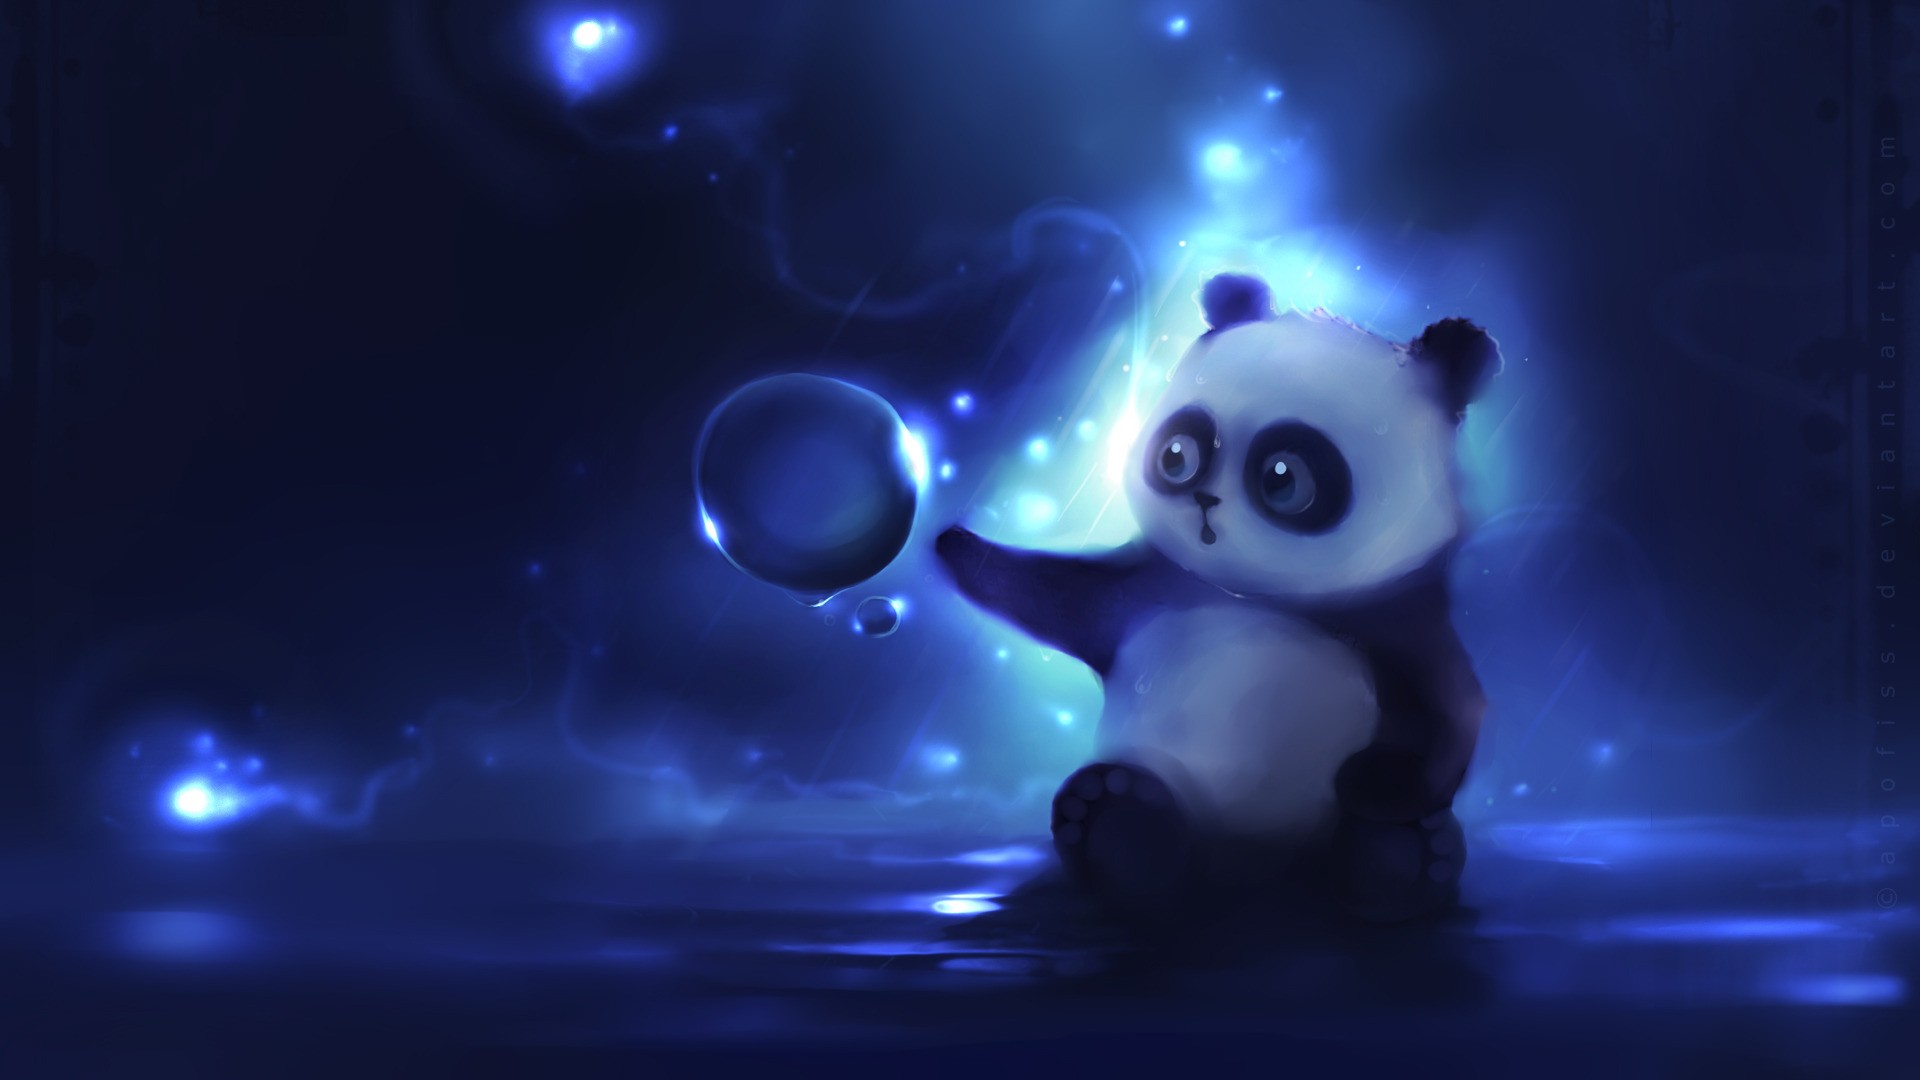 Free download Cute Panda with Blue Background Art Wallpaper Stream [1920x1080] for your Desktop, Mobile & Tablet. Explore Cute Pandas Wallpaper. Cute Pandas Wallpaper, Cute Pandas Wallpaper, Cute